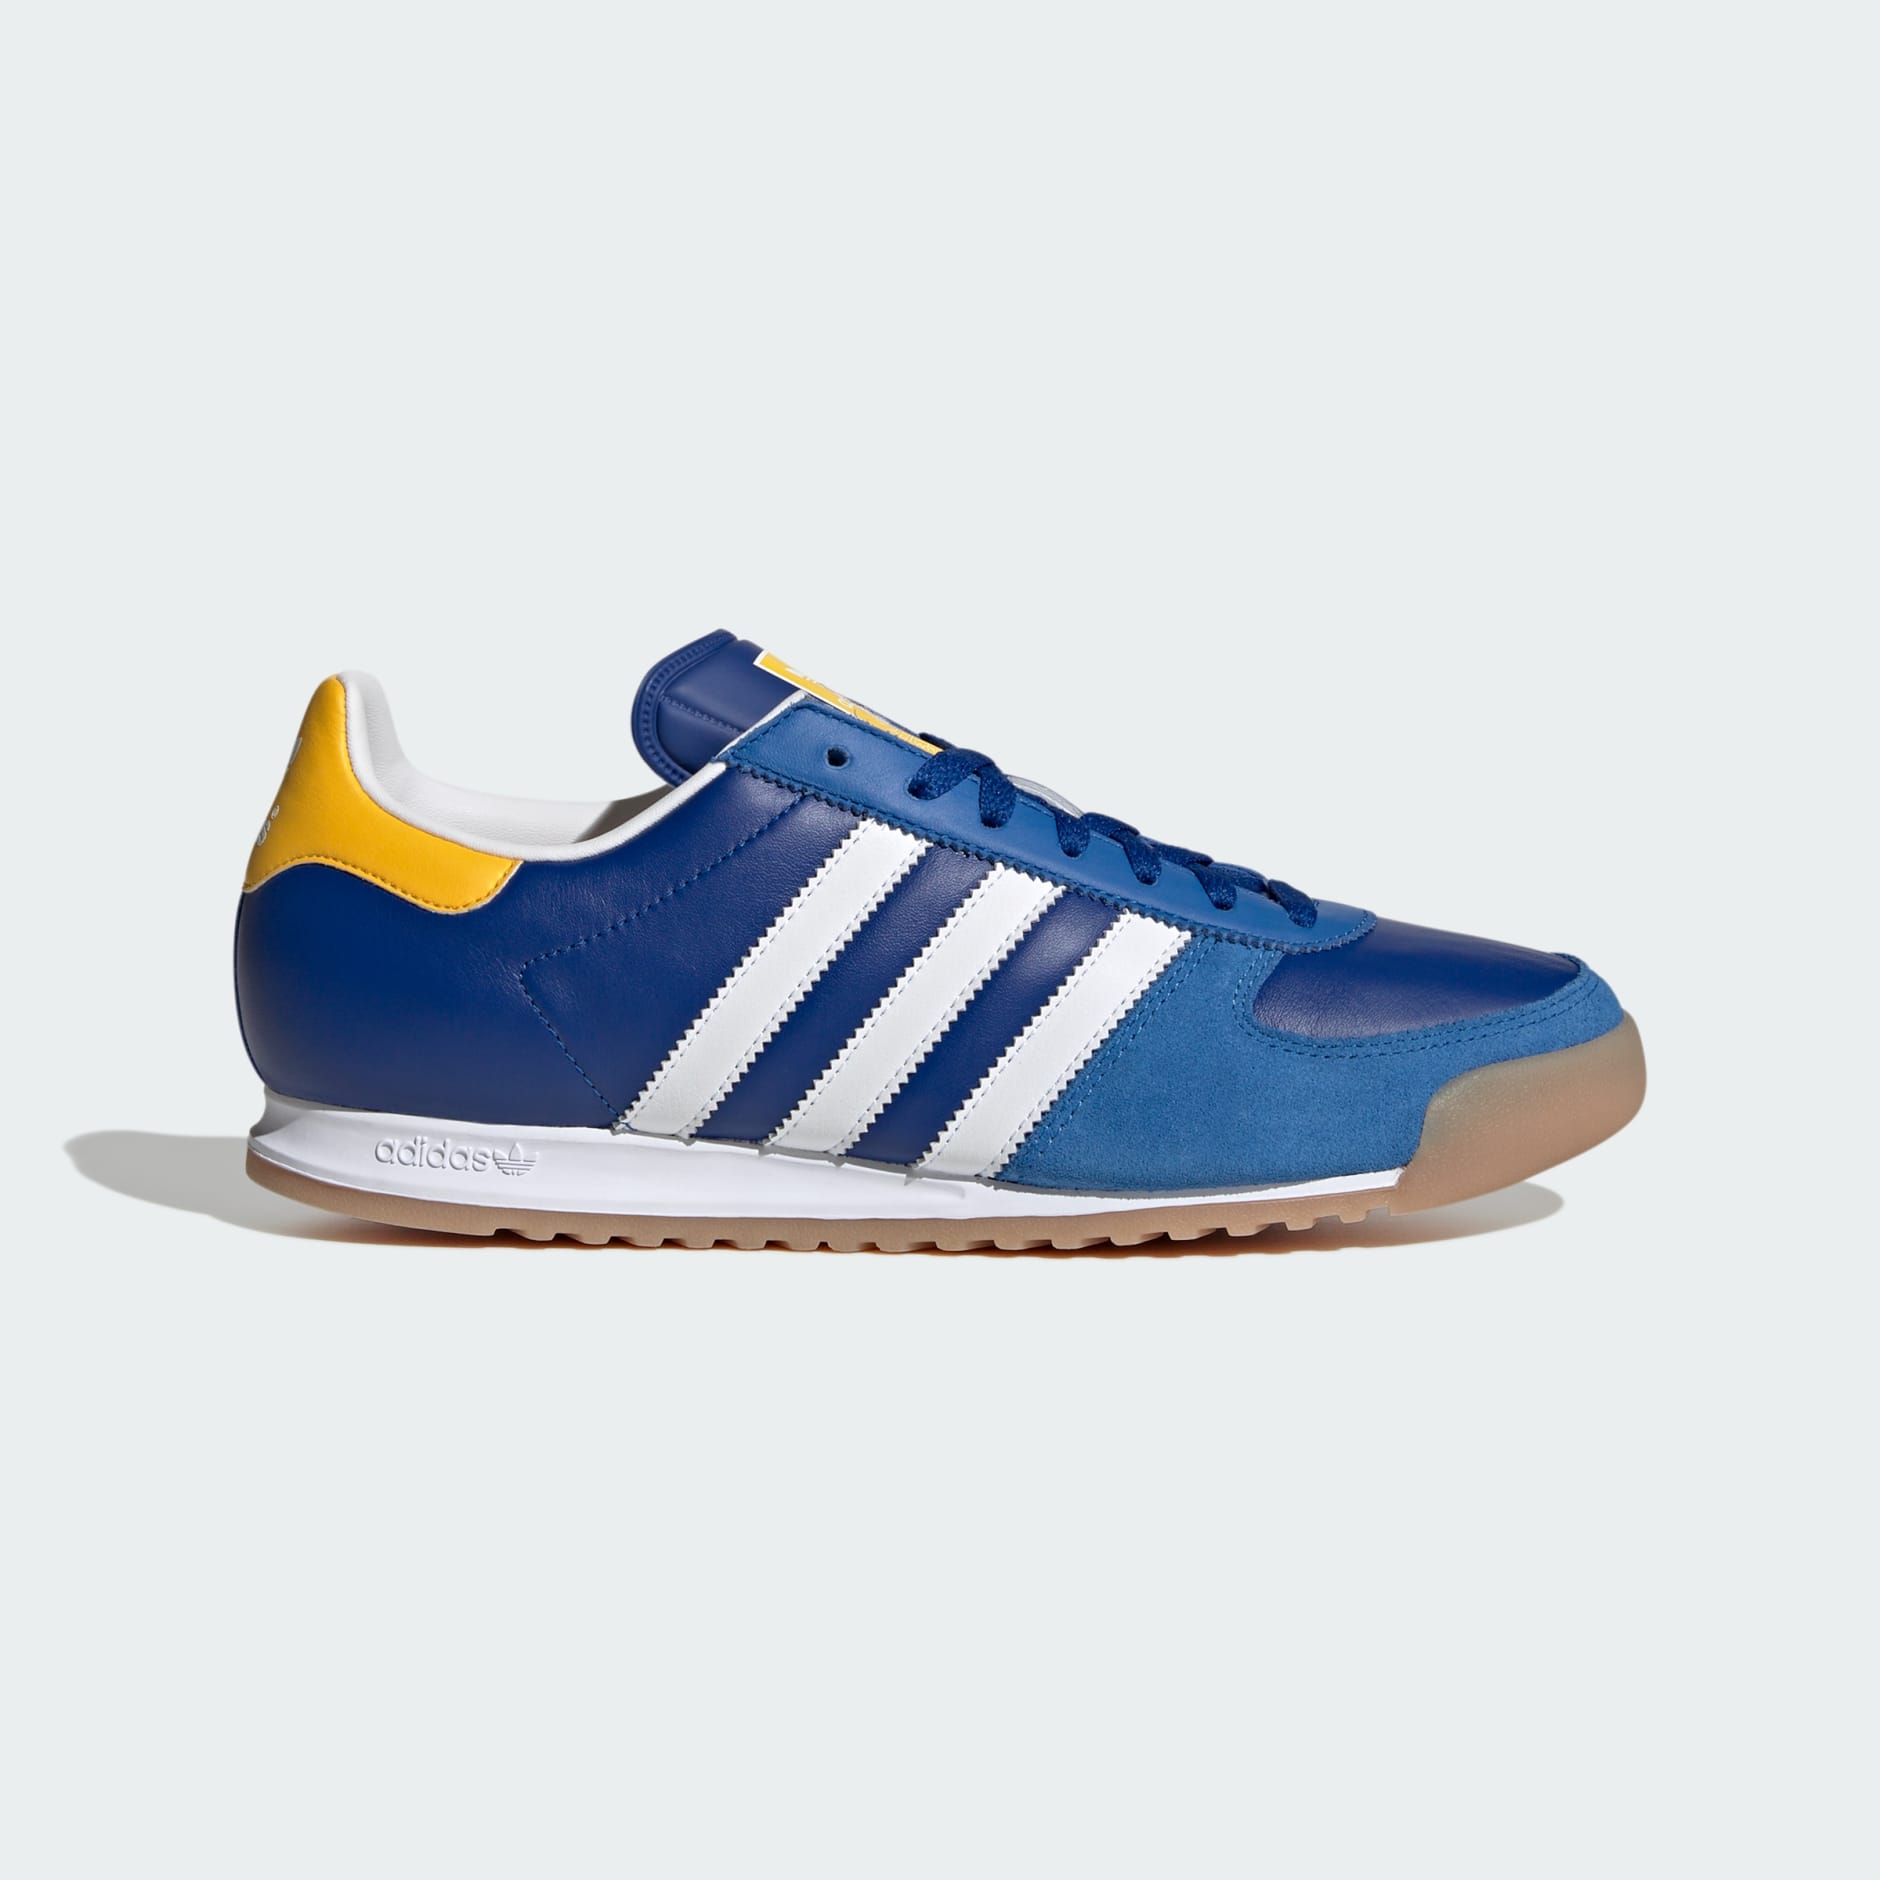 Shoes - Allteam Shoes - Blue | adidas South Africa